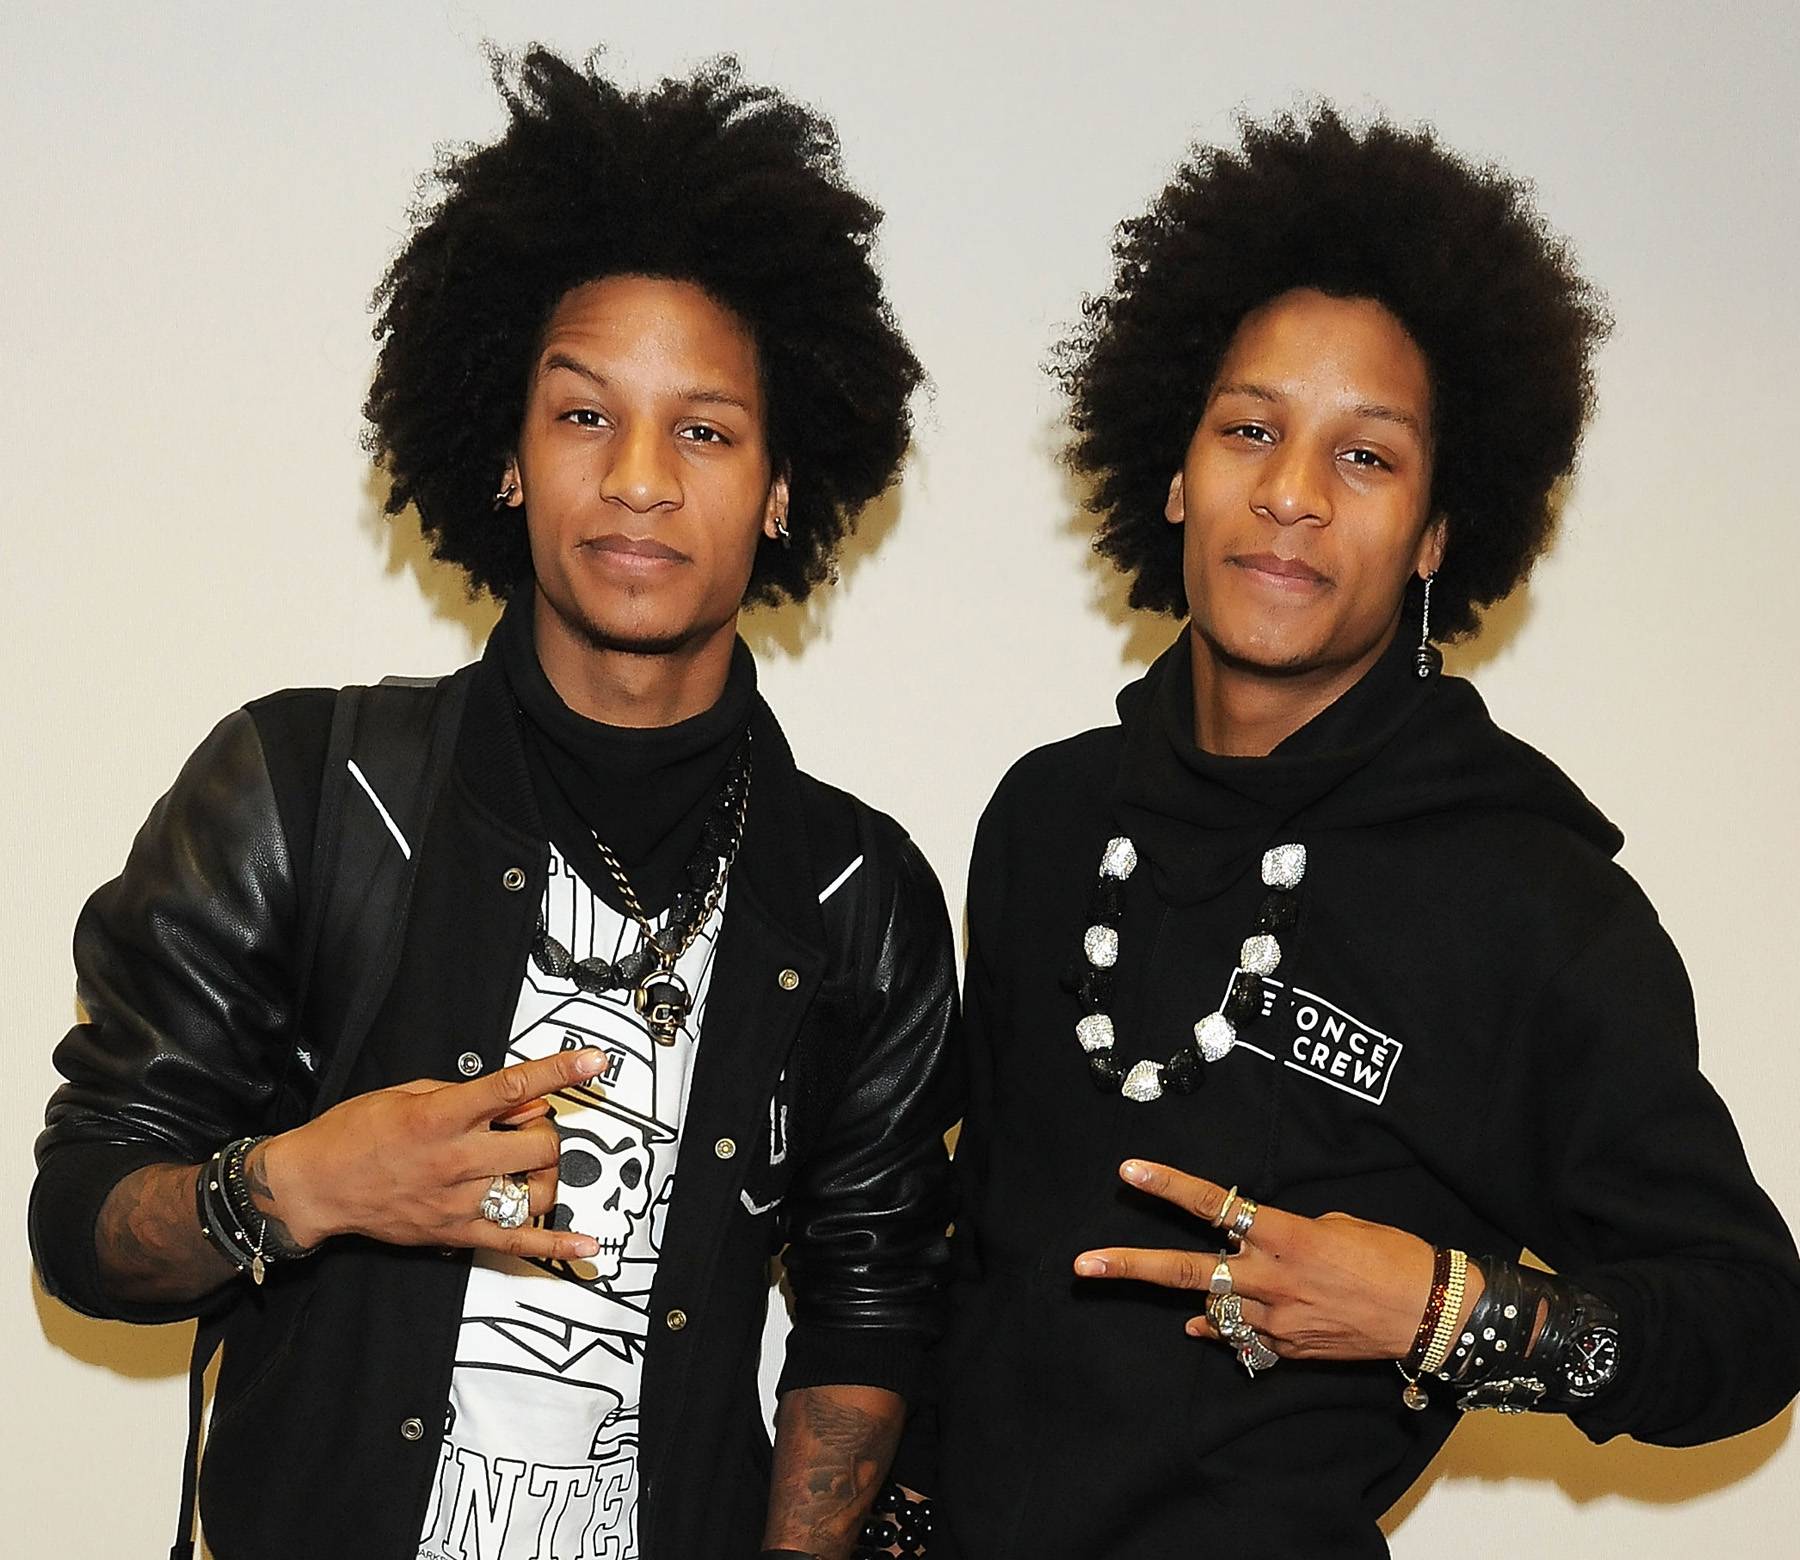 Les Twins - January 31, 2014 - Les Twins are stopping by to dance all over the livest stage.Watch a clip now!&nbsp;(Photo: Jun Sato/WireImage)